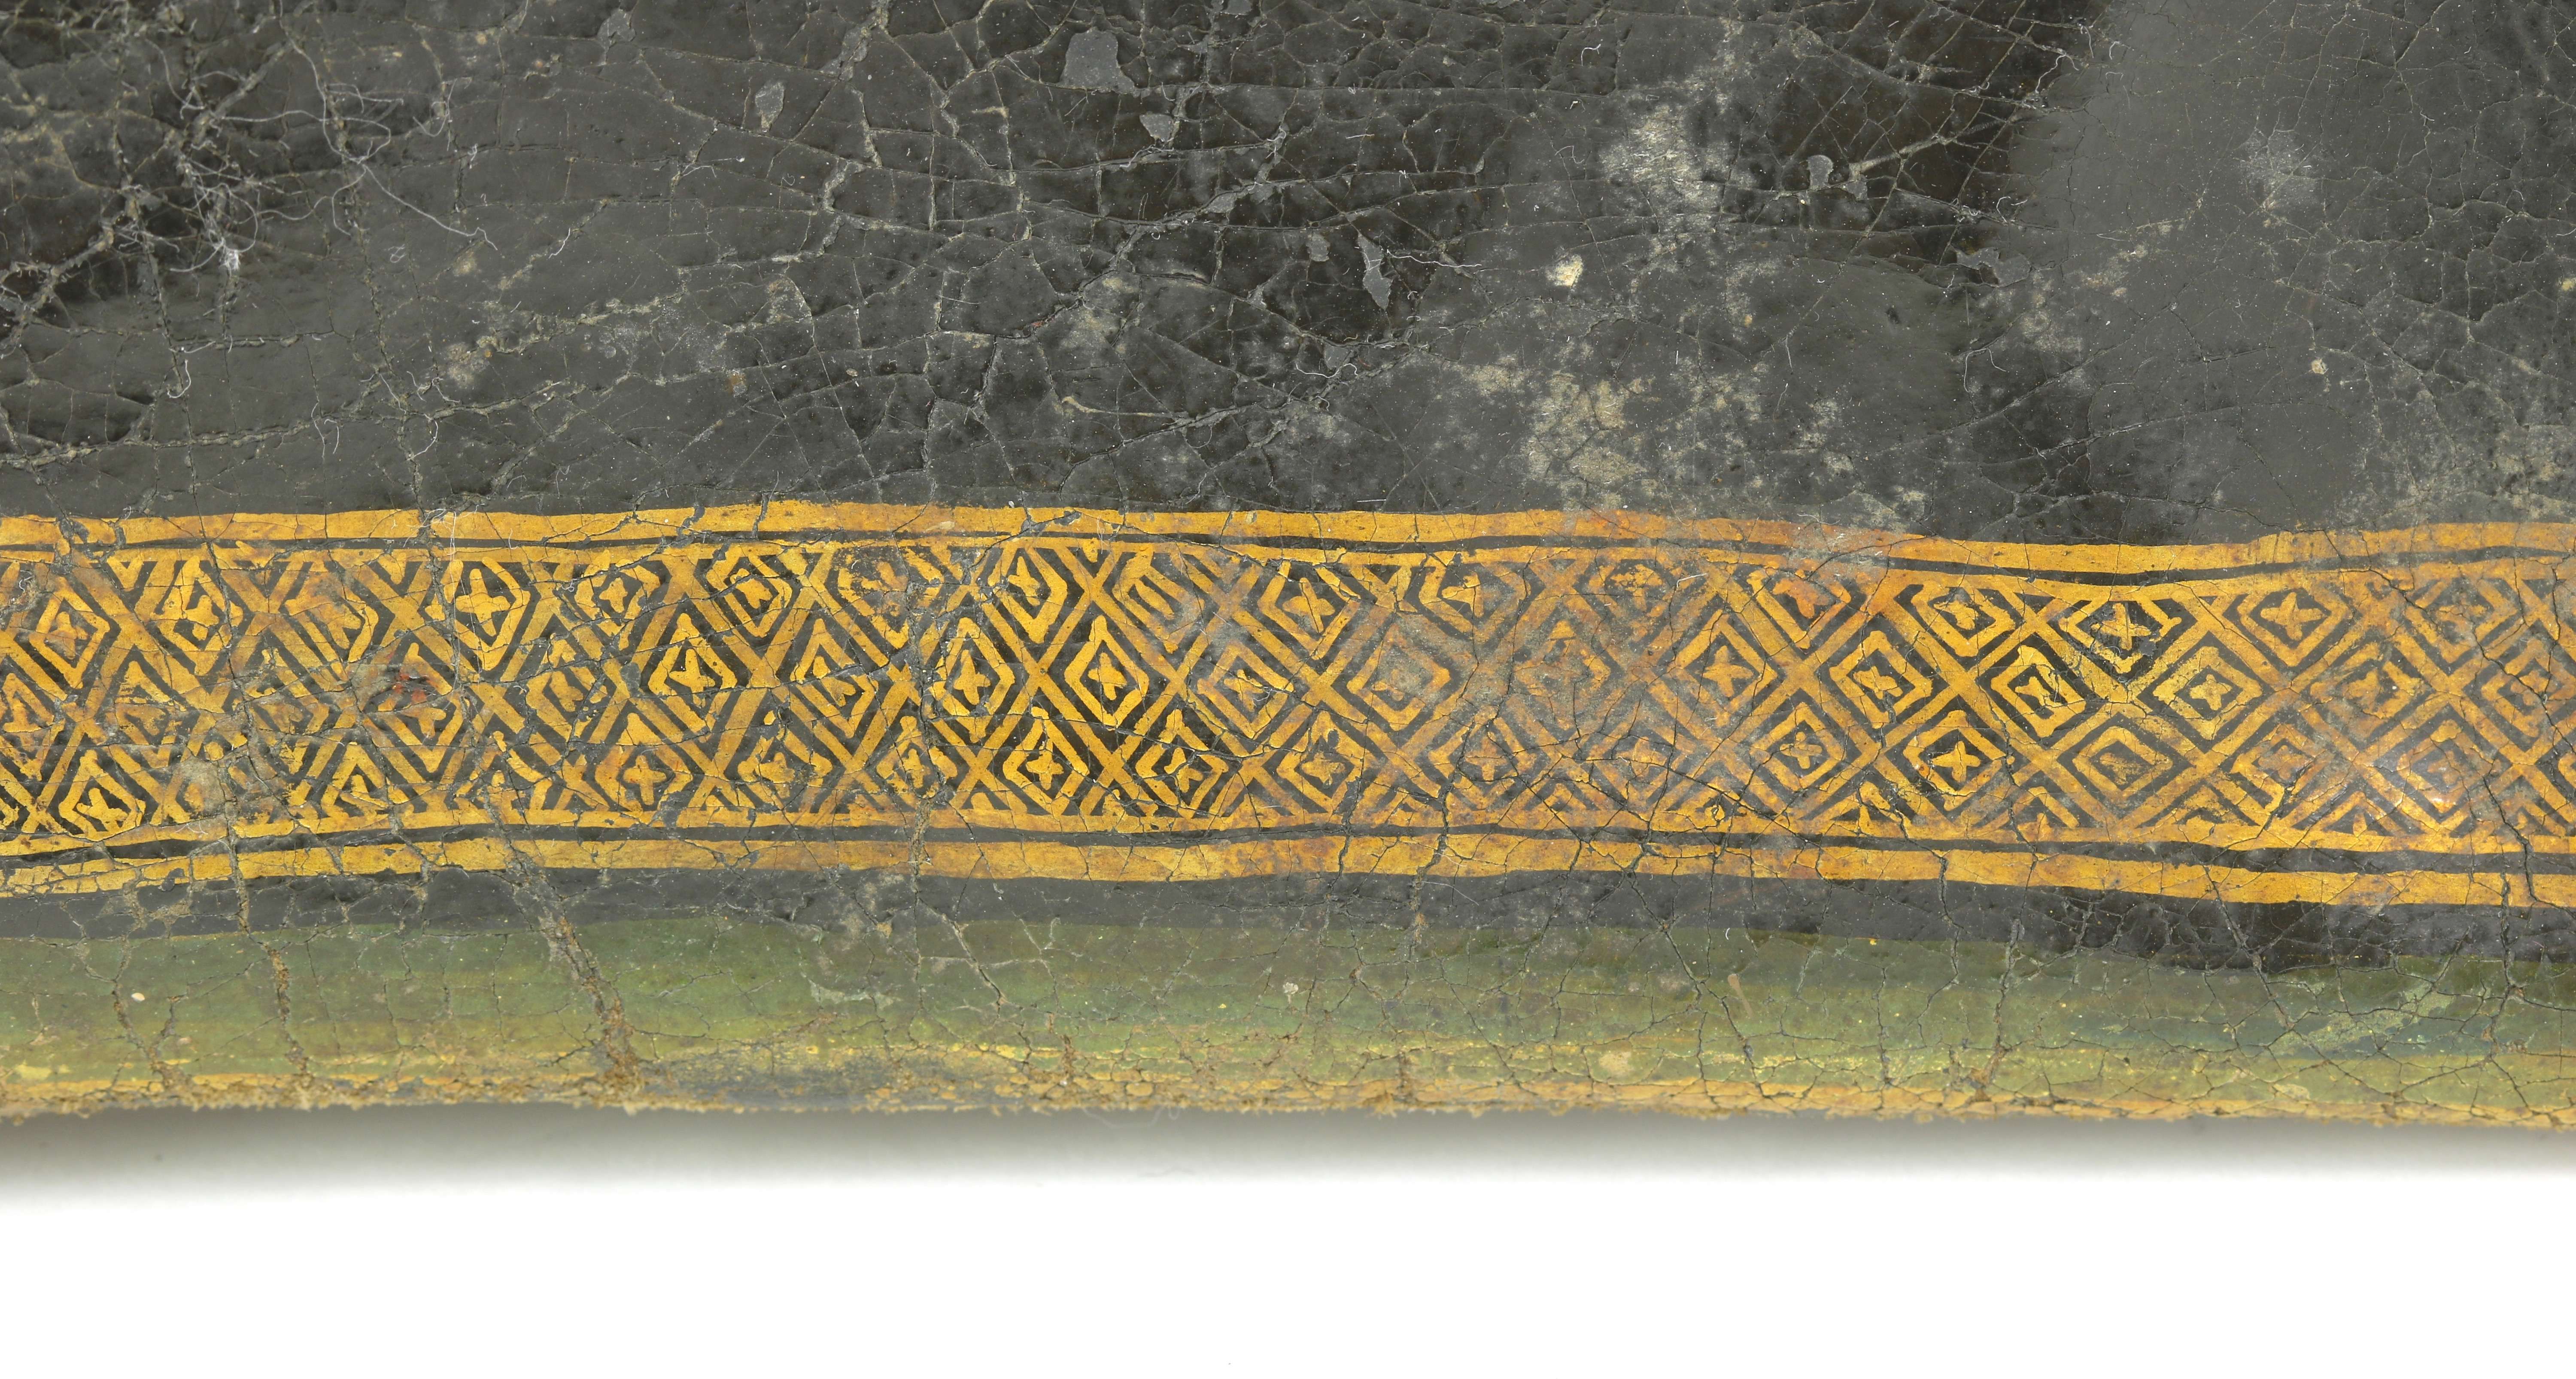 Early Tibetan or Mongol bow case